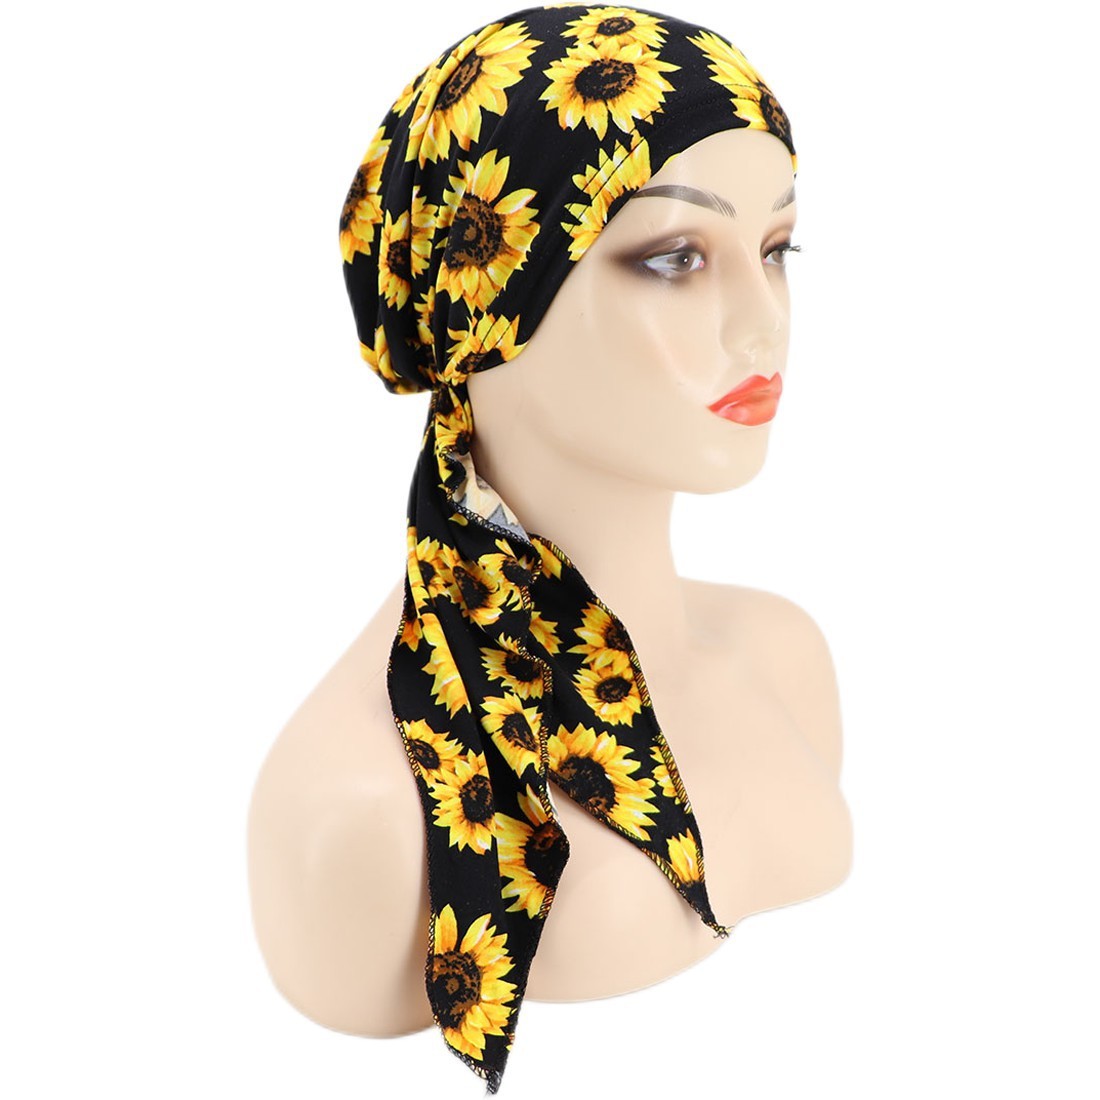 Printed Long Tail Chemotherapy Hood